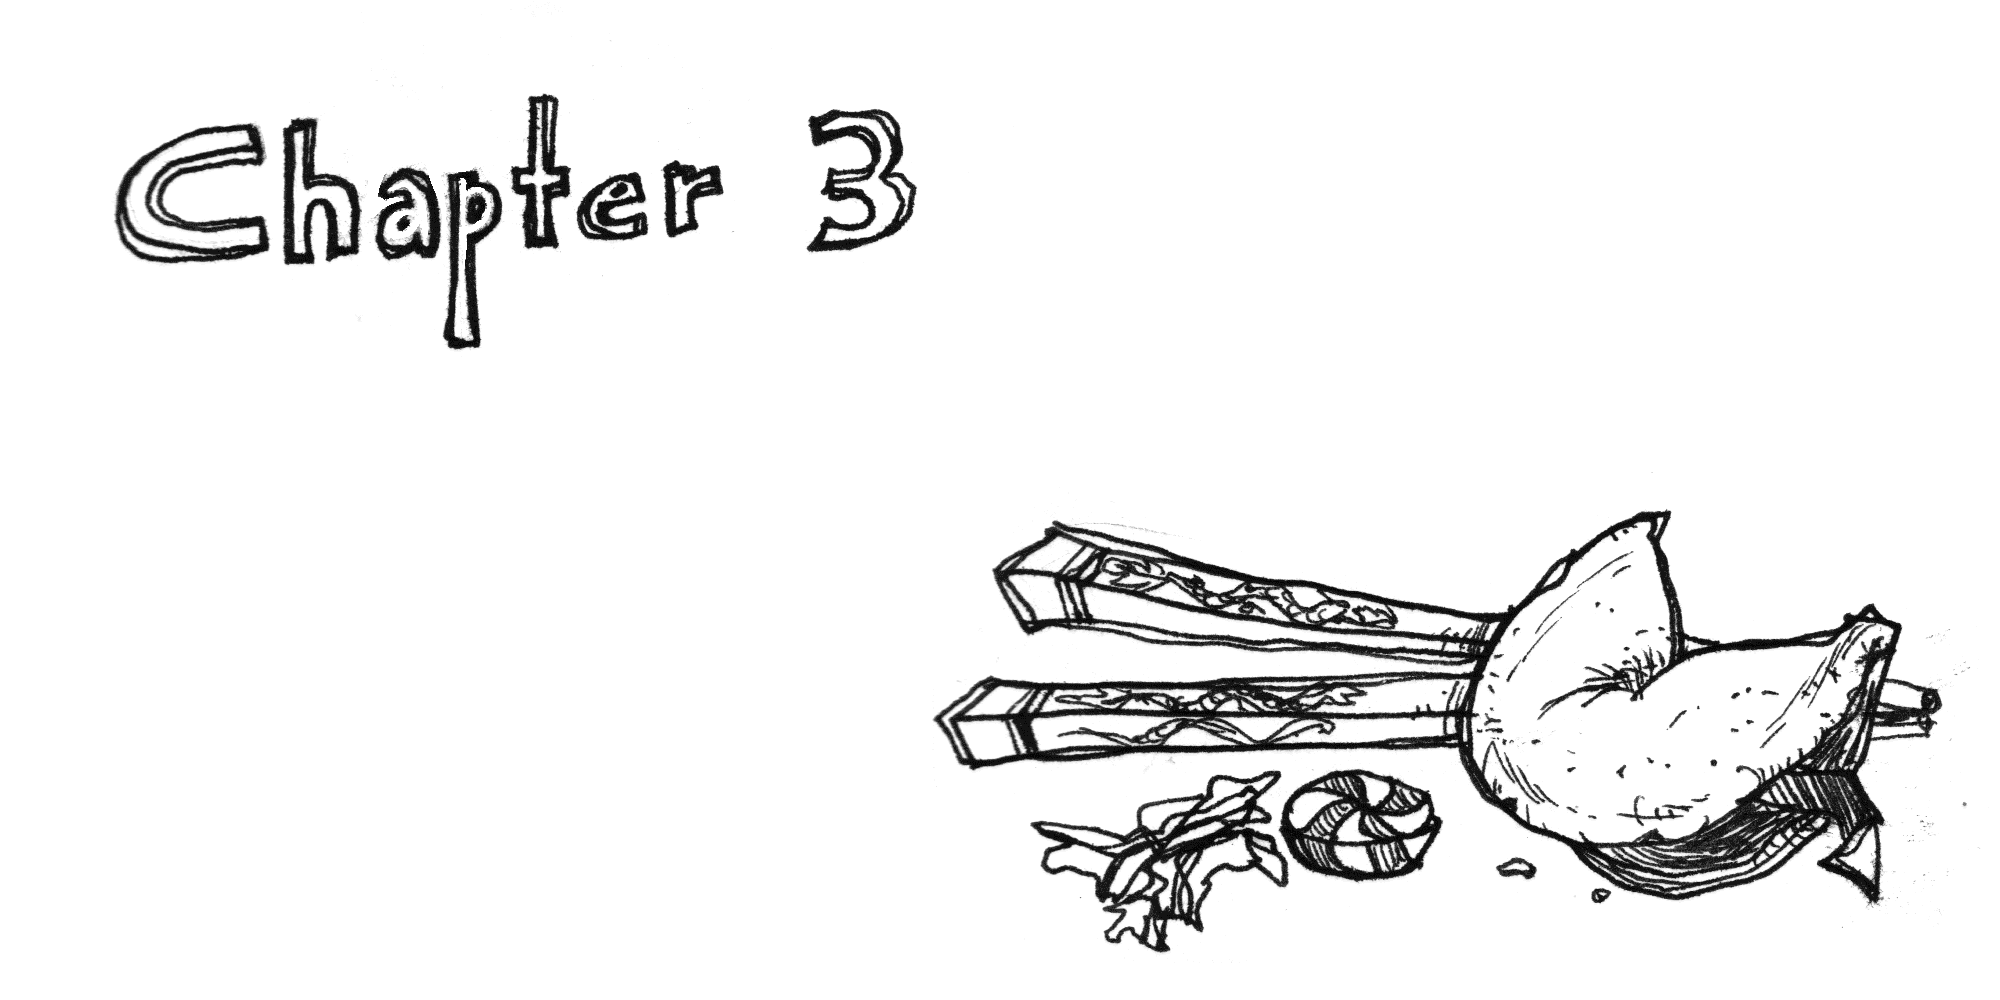 Chapter 3 intertitle!  An illustration of chopsticks, a fortune cookie, and an unwrapped peppermint candy.